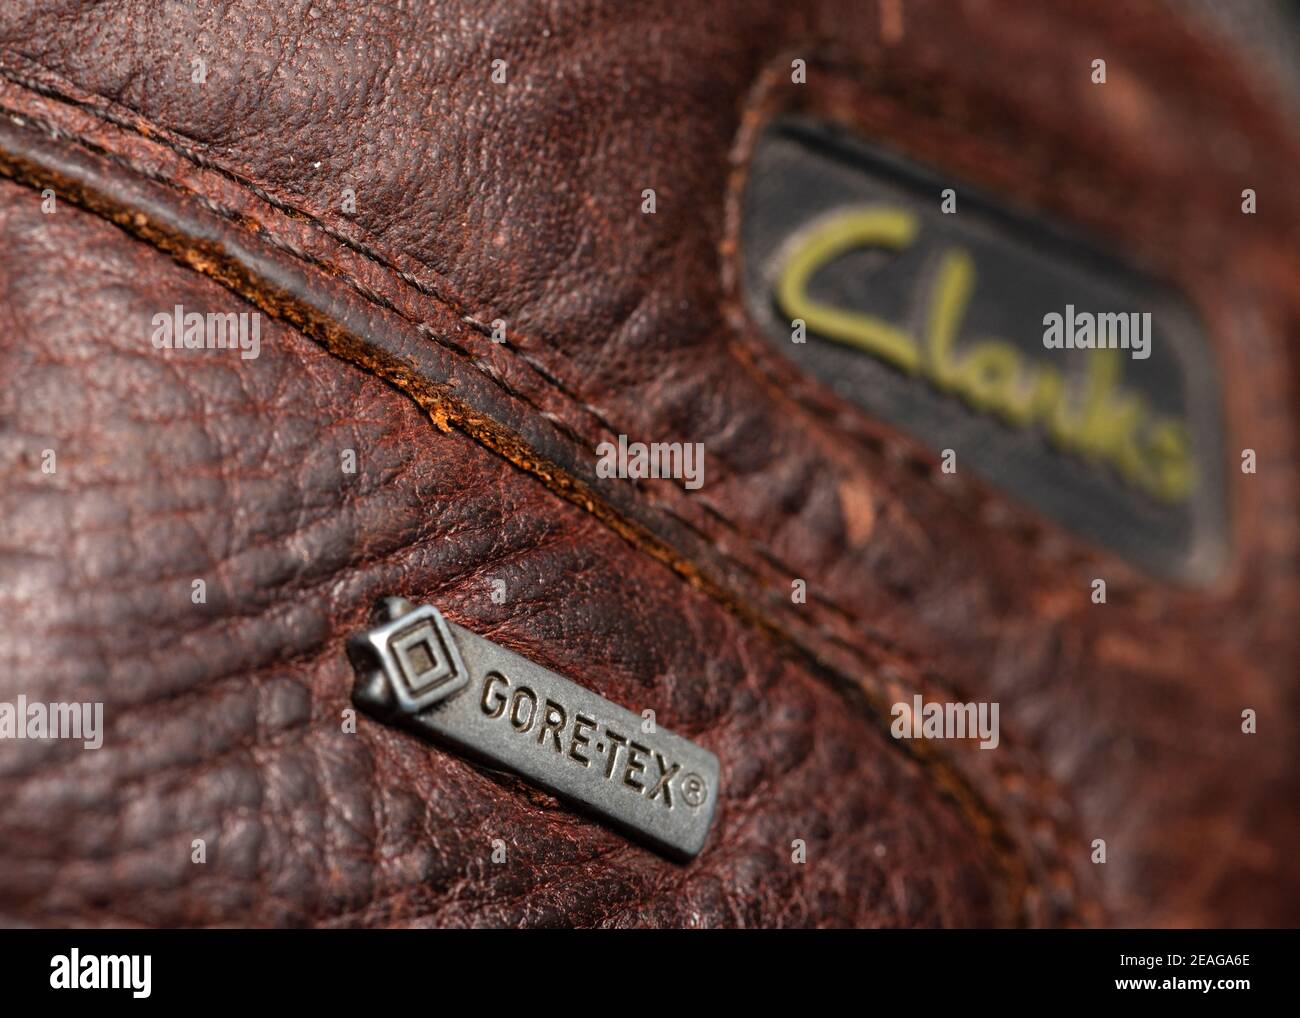 Clarks shoes. Gore-tex metal badge on Clarks Outdoor waterproof men's brown  leather hiking boots close up detail Stock Photo - Alamy